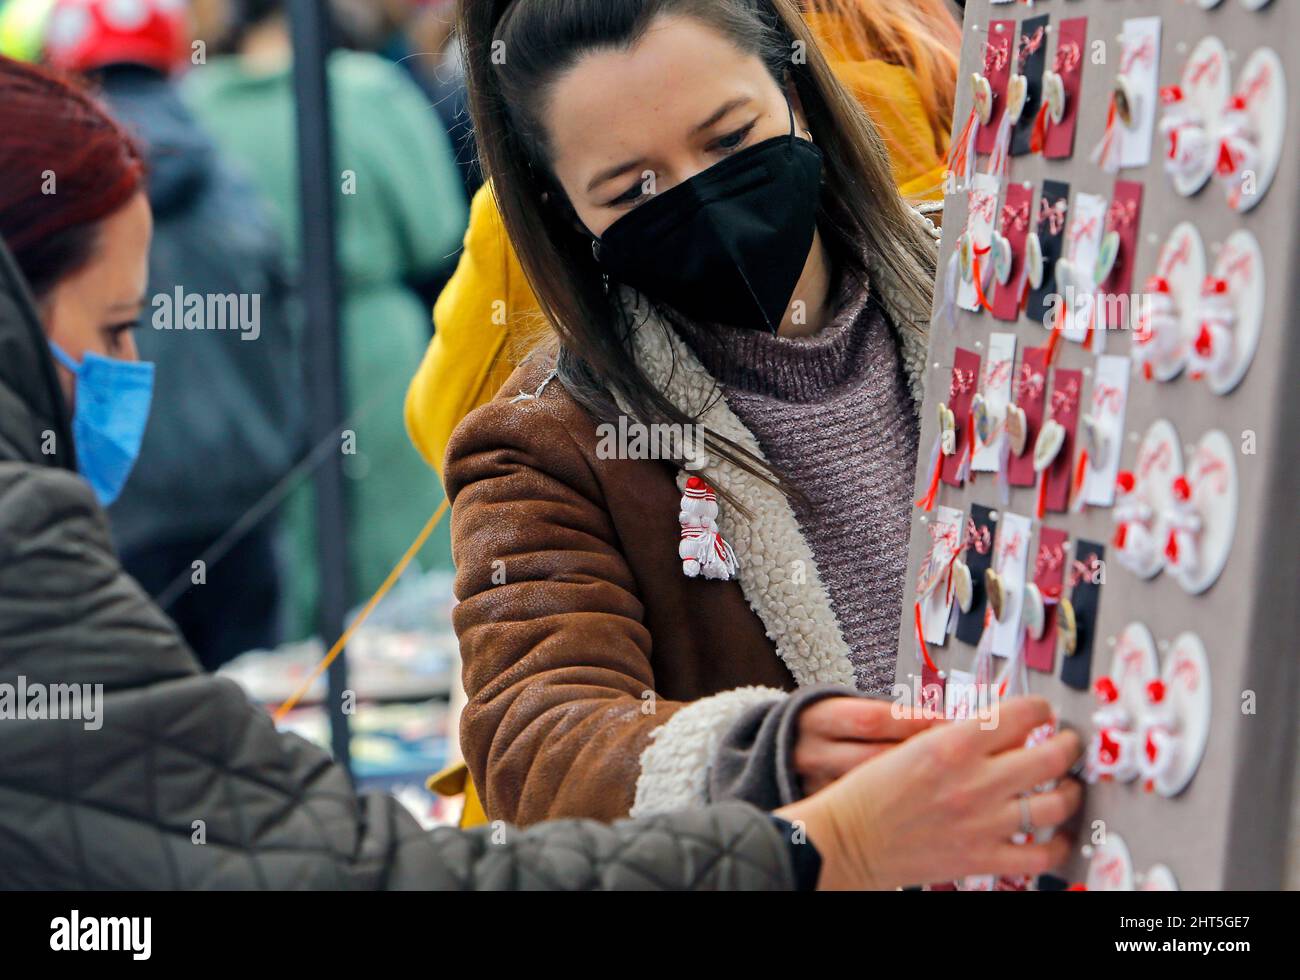 Bucharest, Romania. 26th Feb, 2022. People look at small handmade figurines called 'Martisor' during the 'Martisor Fair' in Bucharest, capital of Romania, Feb. 26, 2022. Martisor is a small decoration tied with a red-and-white twisted string, given to women on the 1st of March as a token of appreciation, love or friendship and as a wish of health, being at the same time a symbol of the coming spring. Credit: Cristian Cristel/Xinhua/Alamy Live News Stock Photo